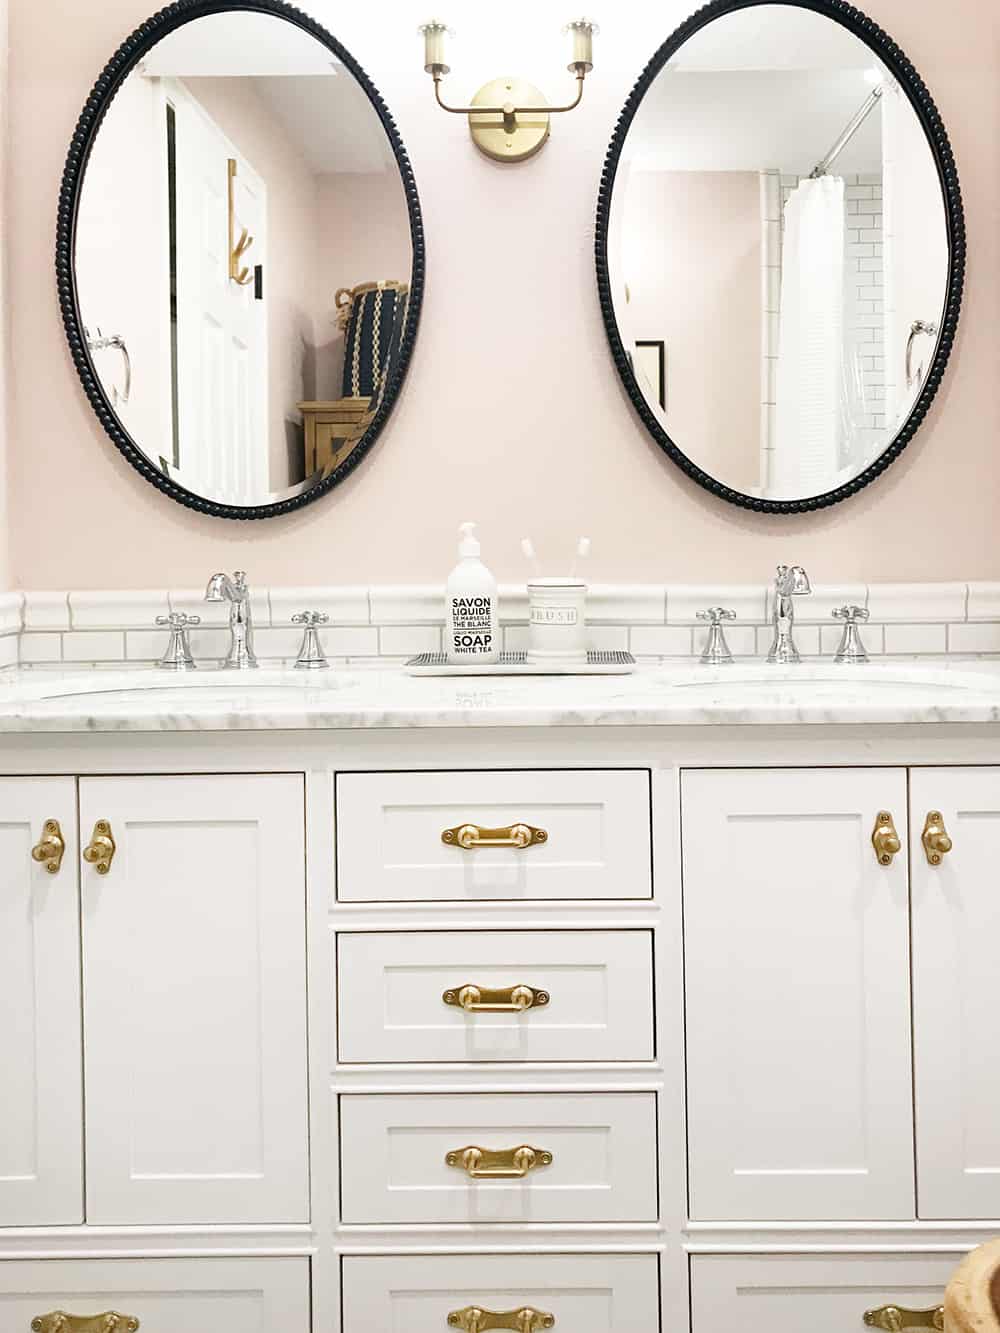 A double-sink bathroom vanity with white cabinets and white marble countertops. the bathroom fixtures are mixed metals - gold cabinet handles, chrome faucets, and black metal framed oval mirrors handing above each sink.